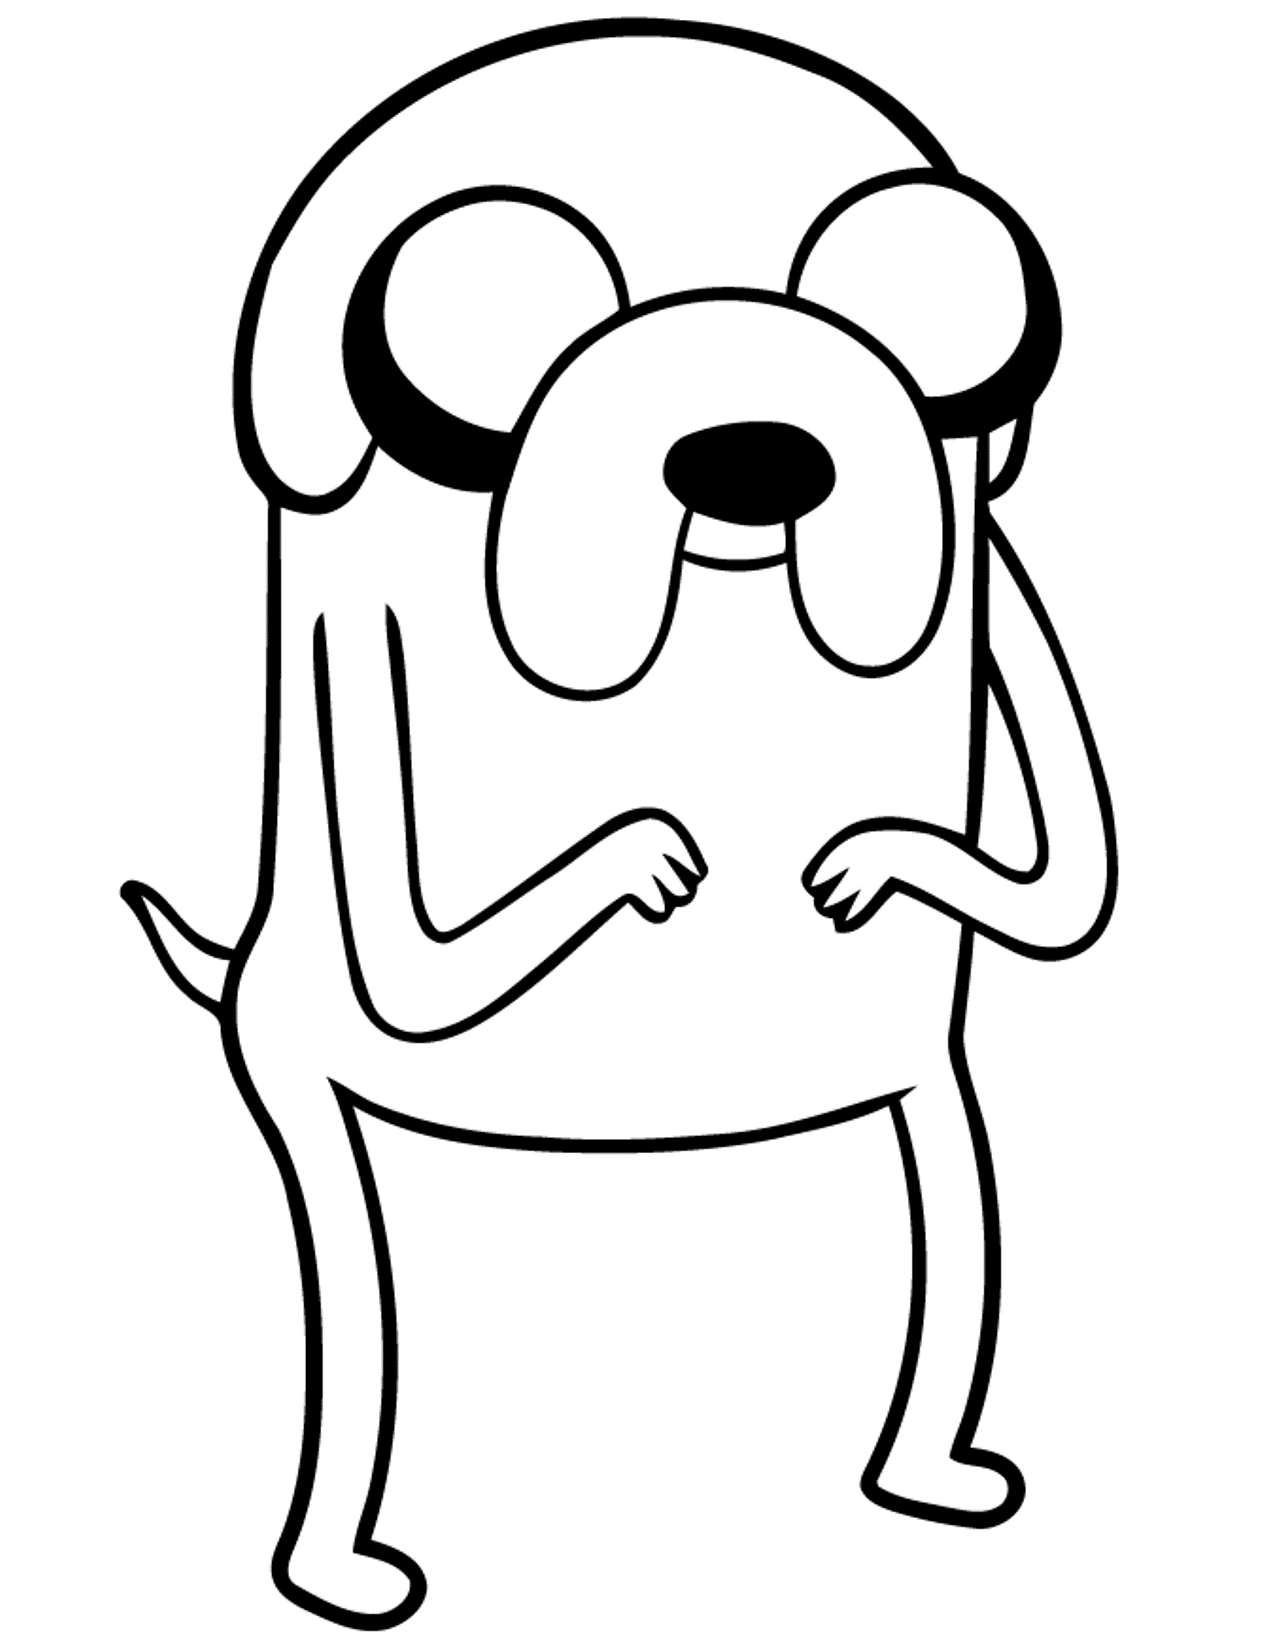 Jake The Dog Adventure Time Coloring Pages | Cartoon Coloring ...